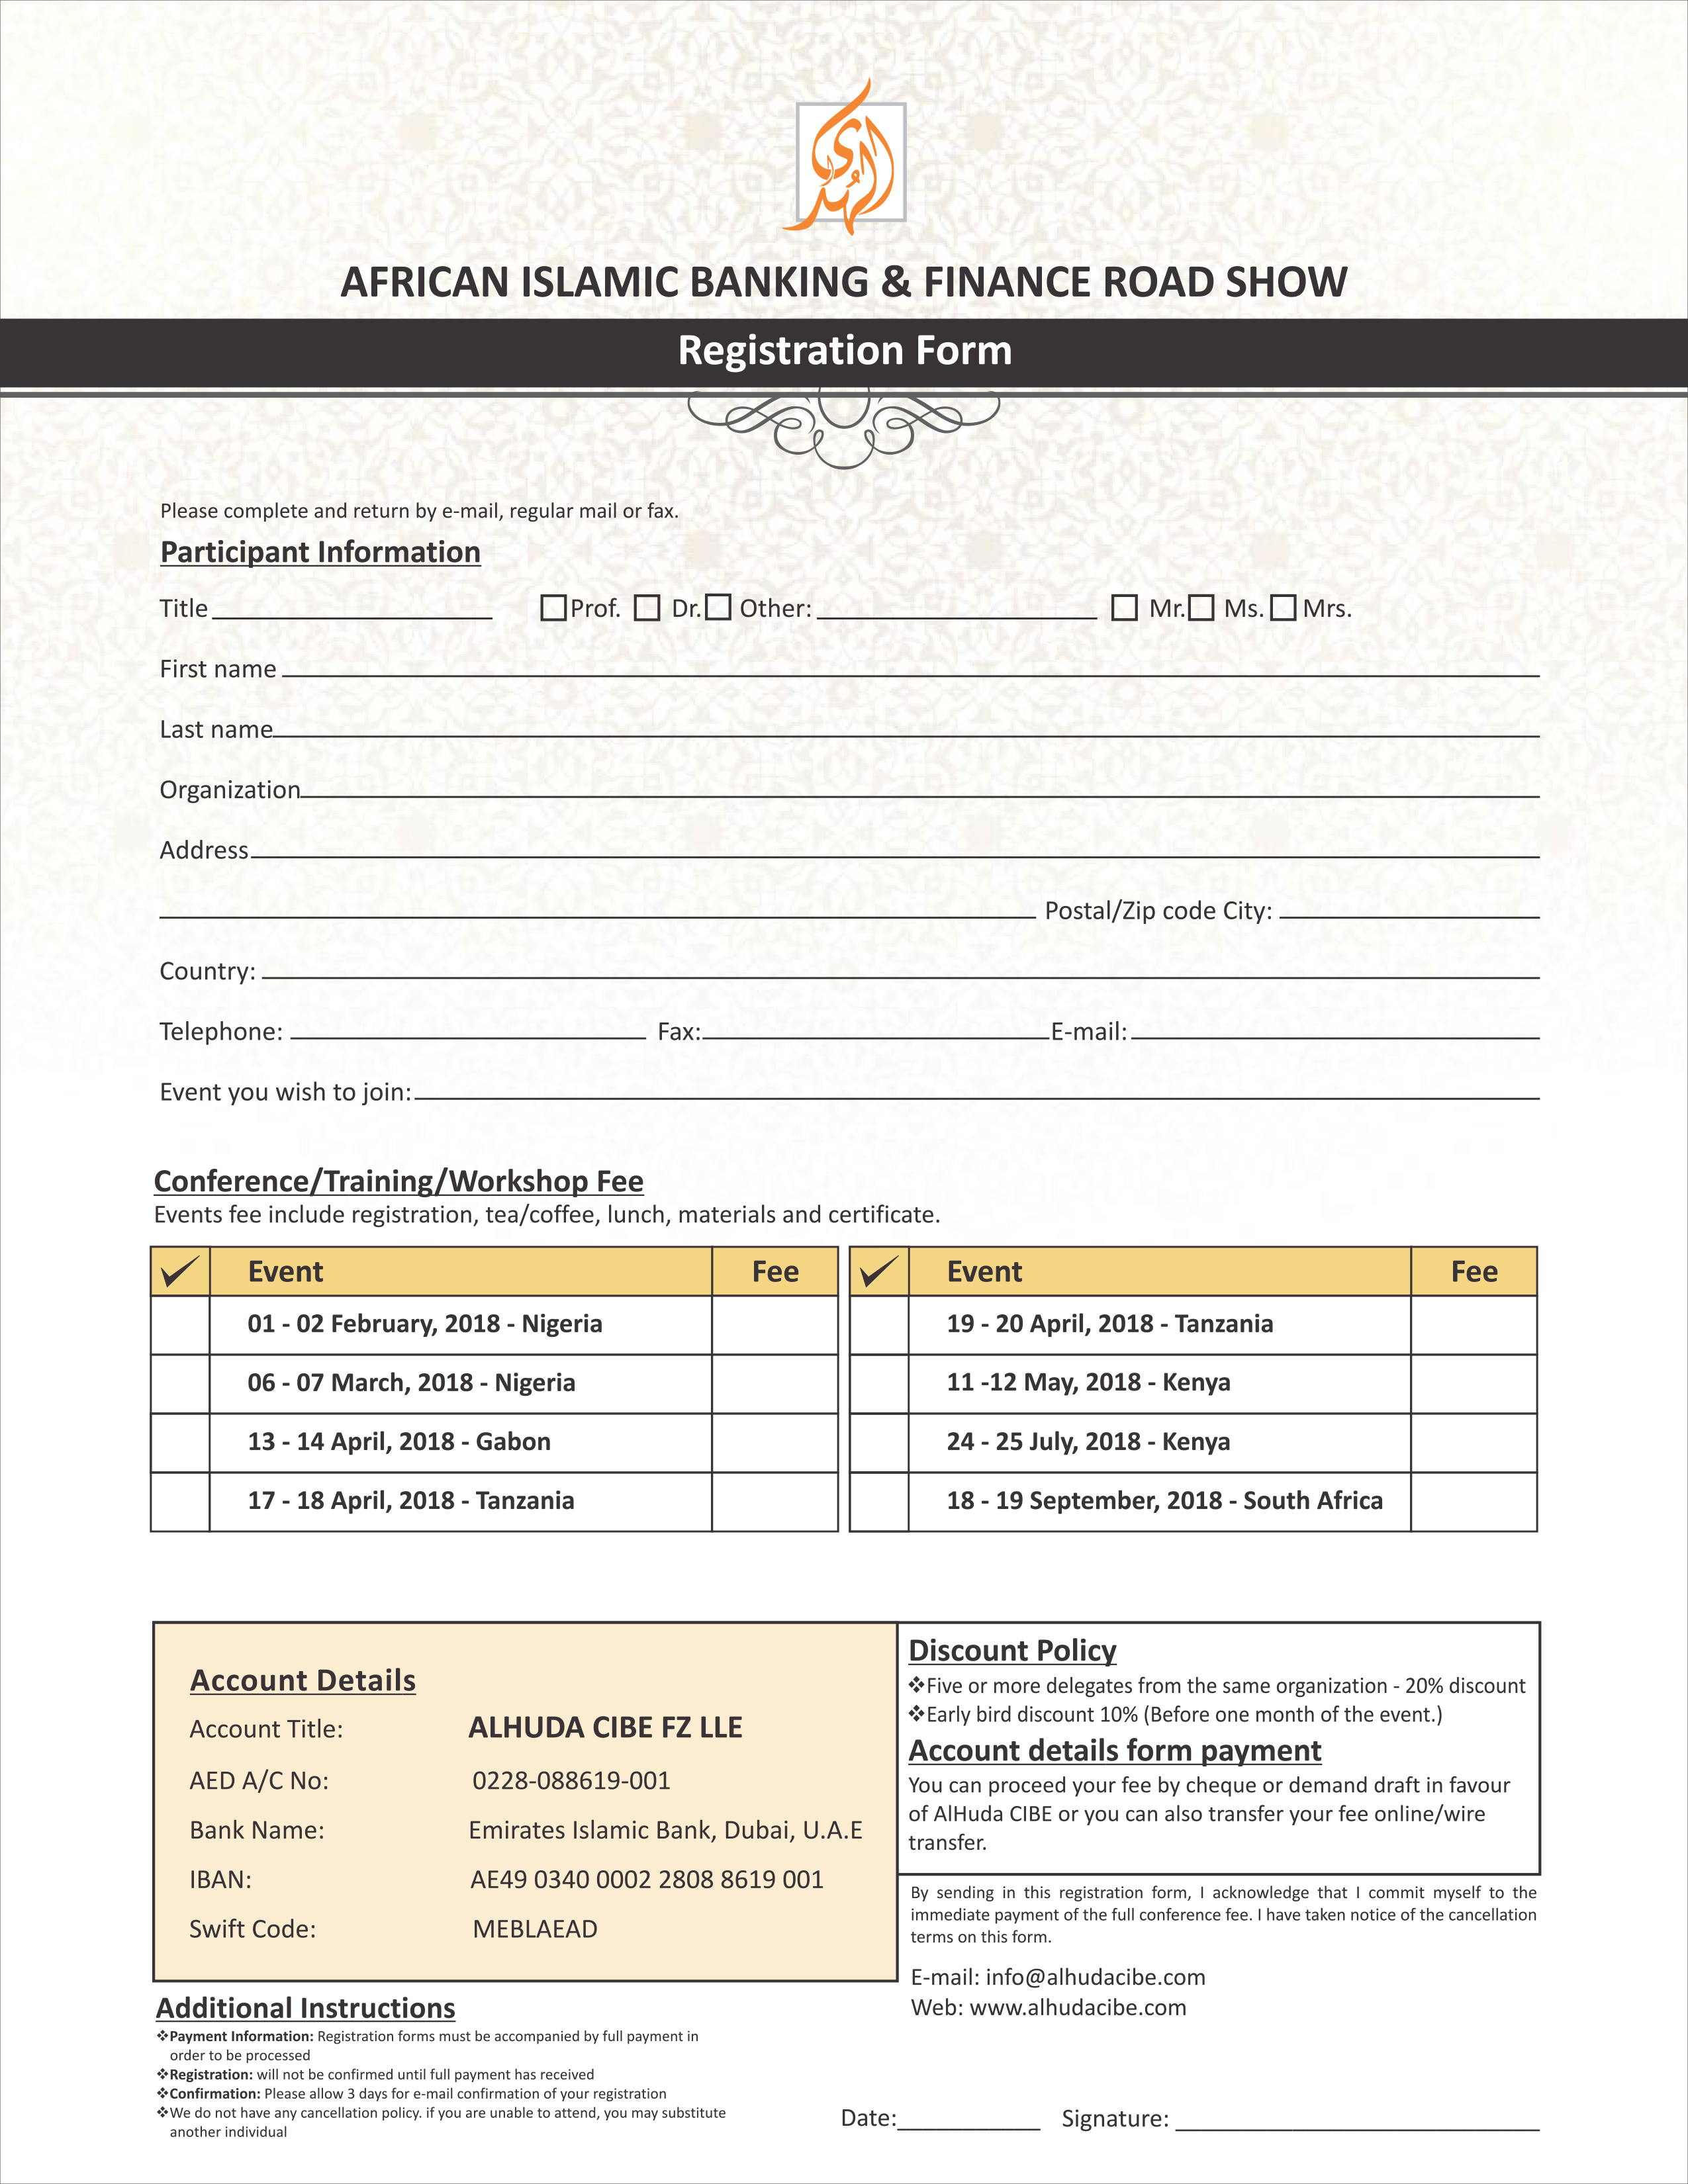 Registration - African Islamic Banking and Finance Road Show 2018